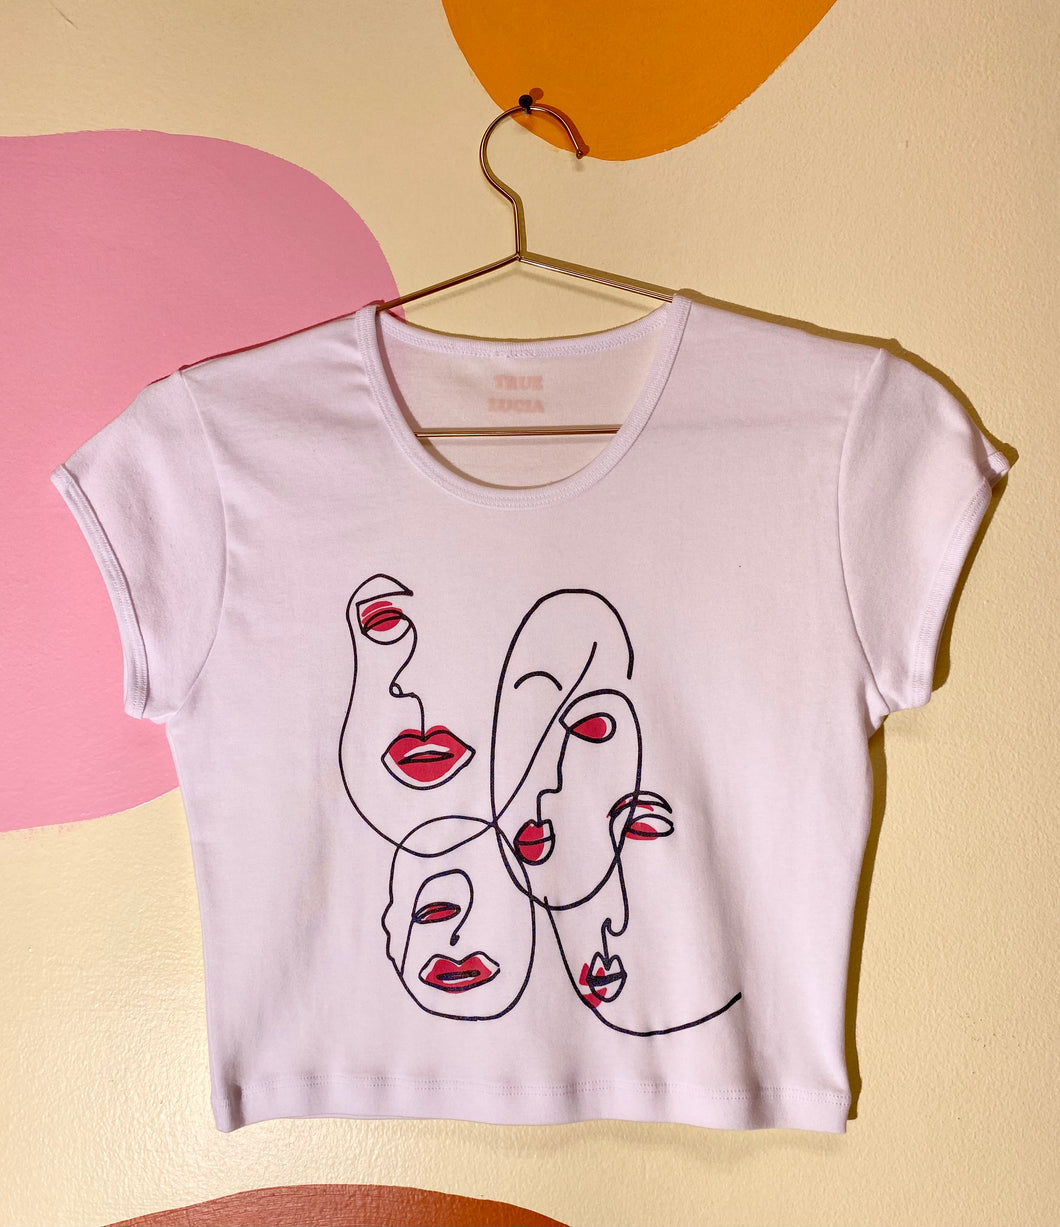 Four lined faces baby tee